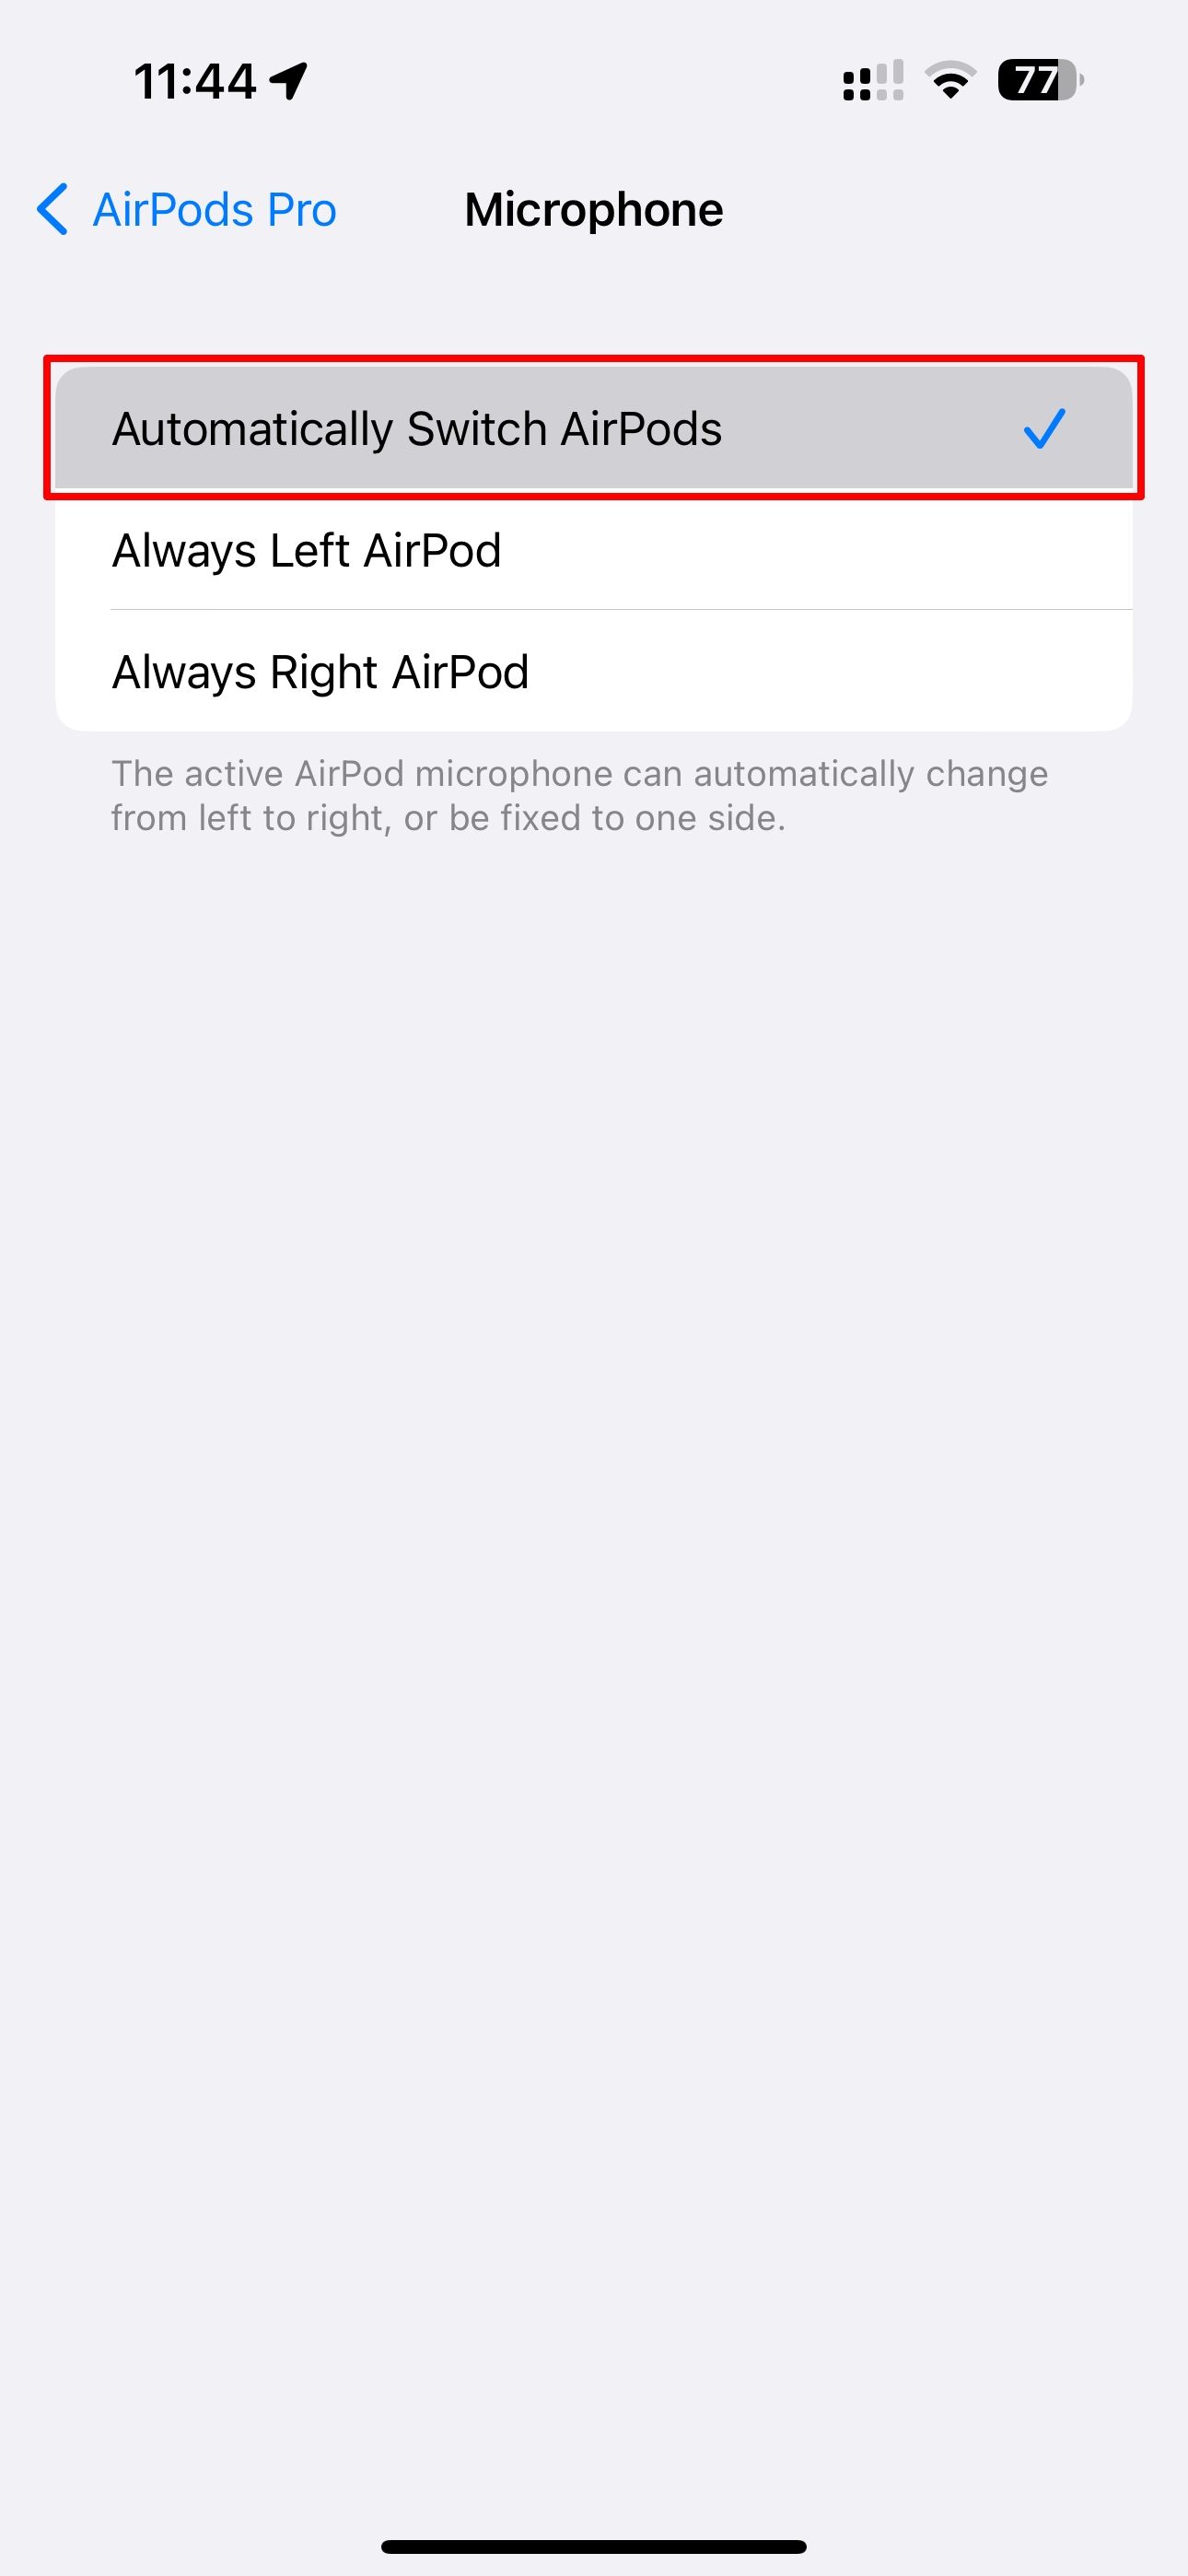 The iPhone Settings app highlighting the Automatically Switch AirPods option